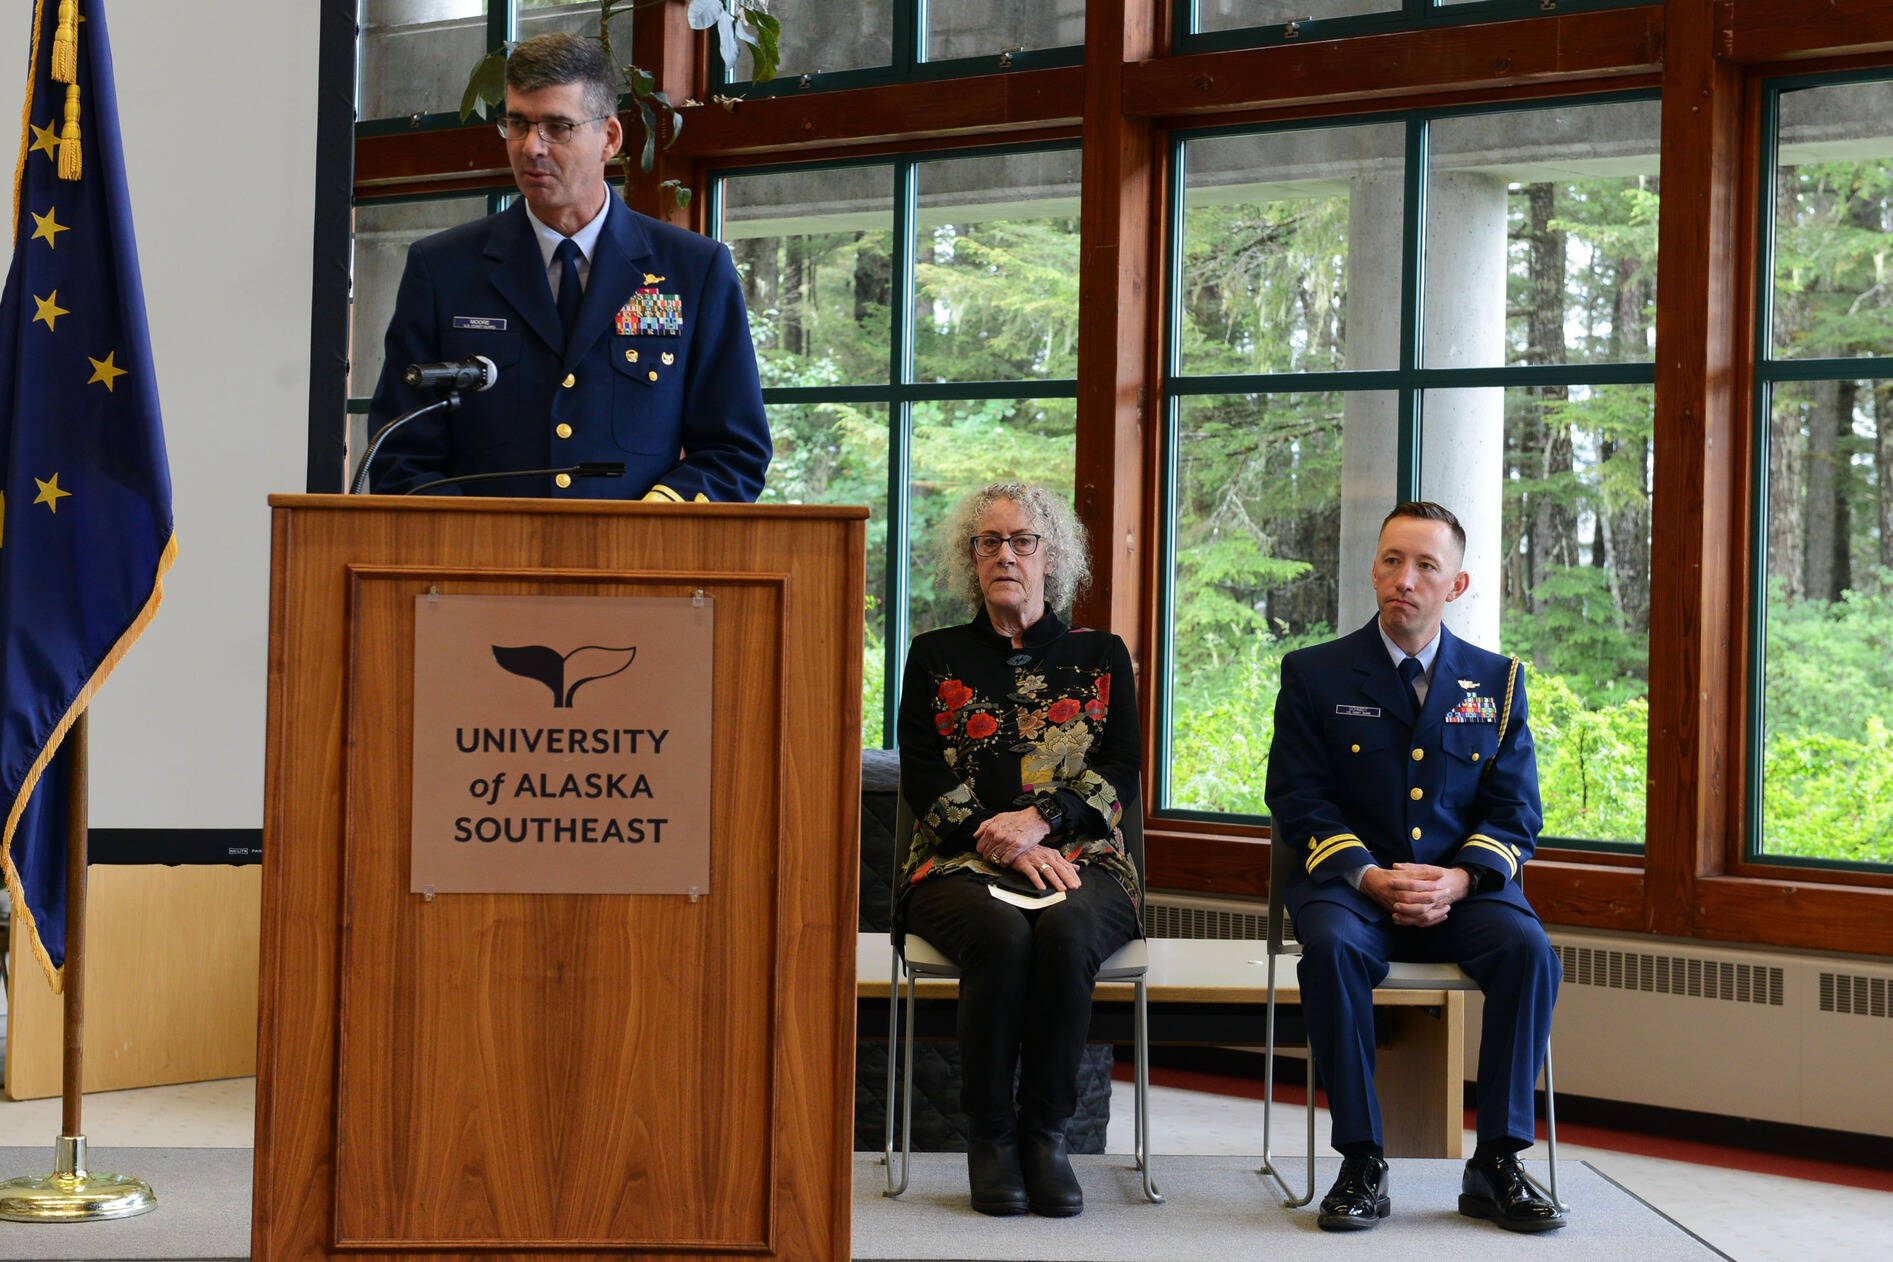 Rear Adm. Nathan Moore, commander of Coast Guard District 17, speaks during a ceremony at University of Alaska Southeast for the renewal of the College Student Pre-Commissioning Initiative on July 25, 2022. (Courtesy photo / USCG)